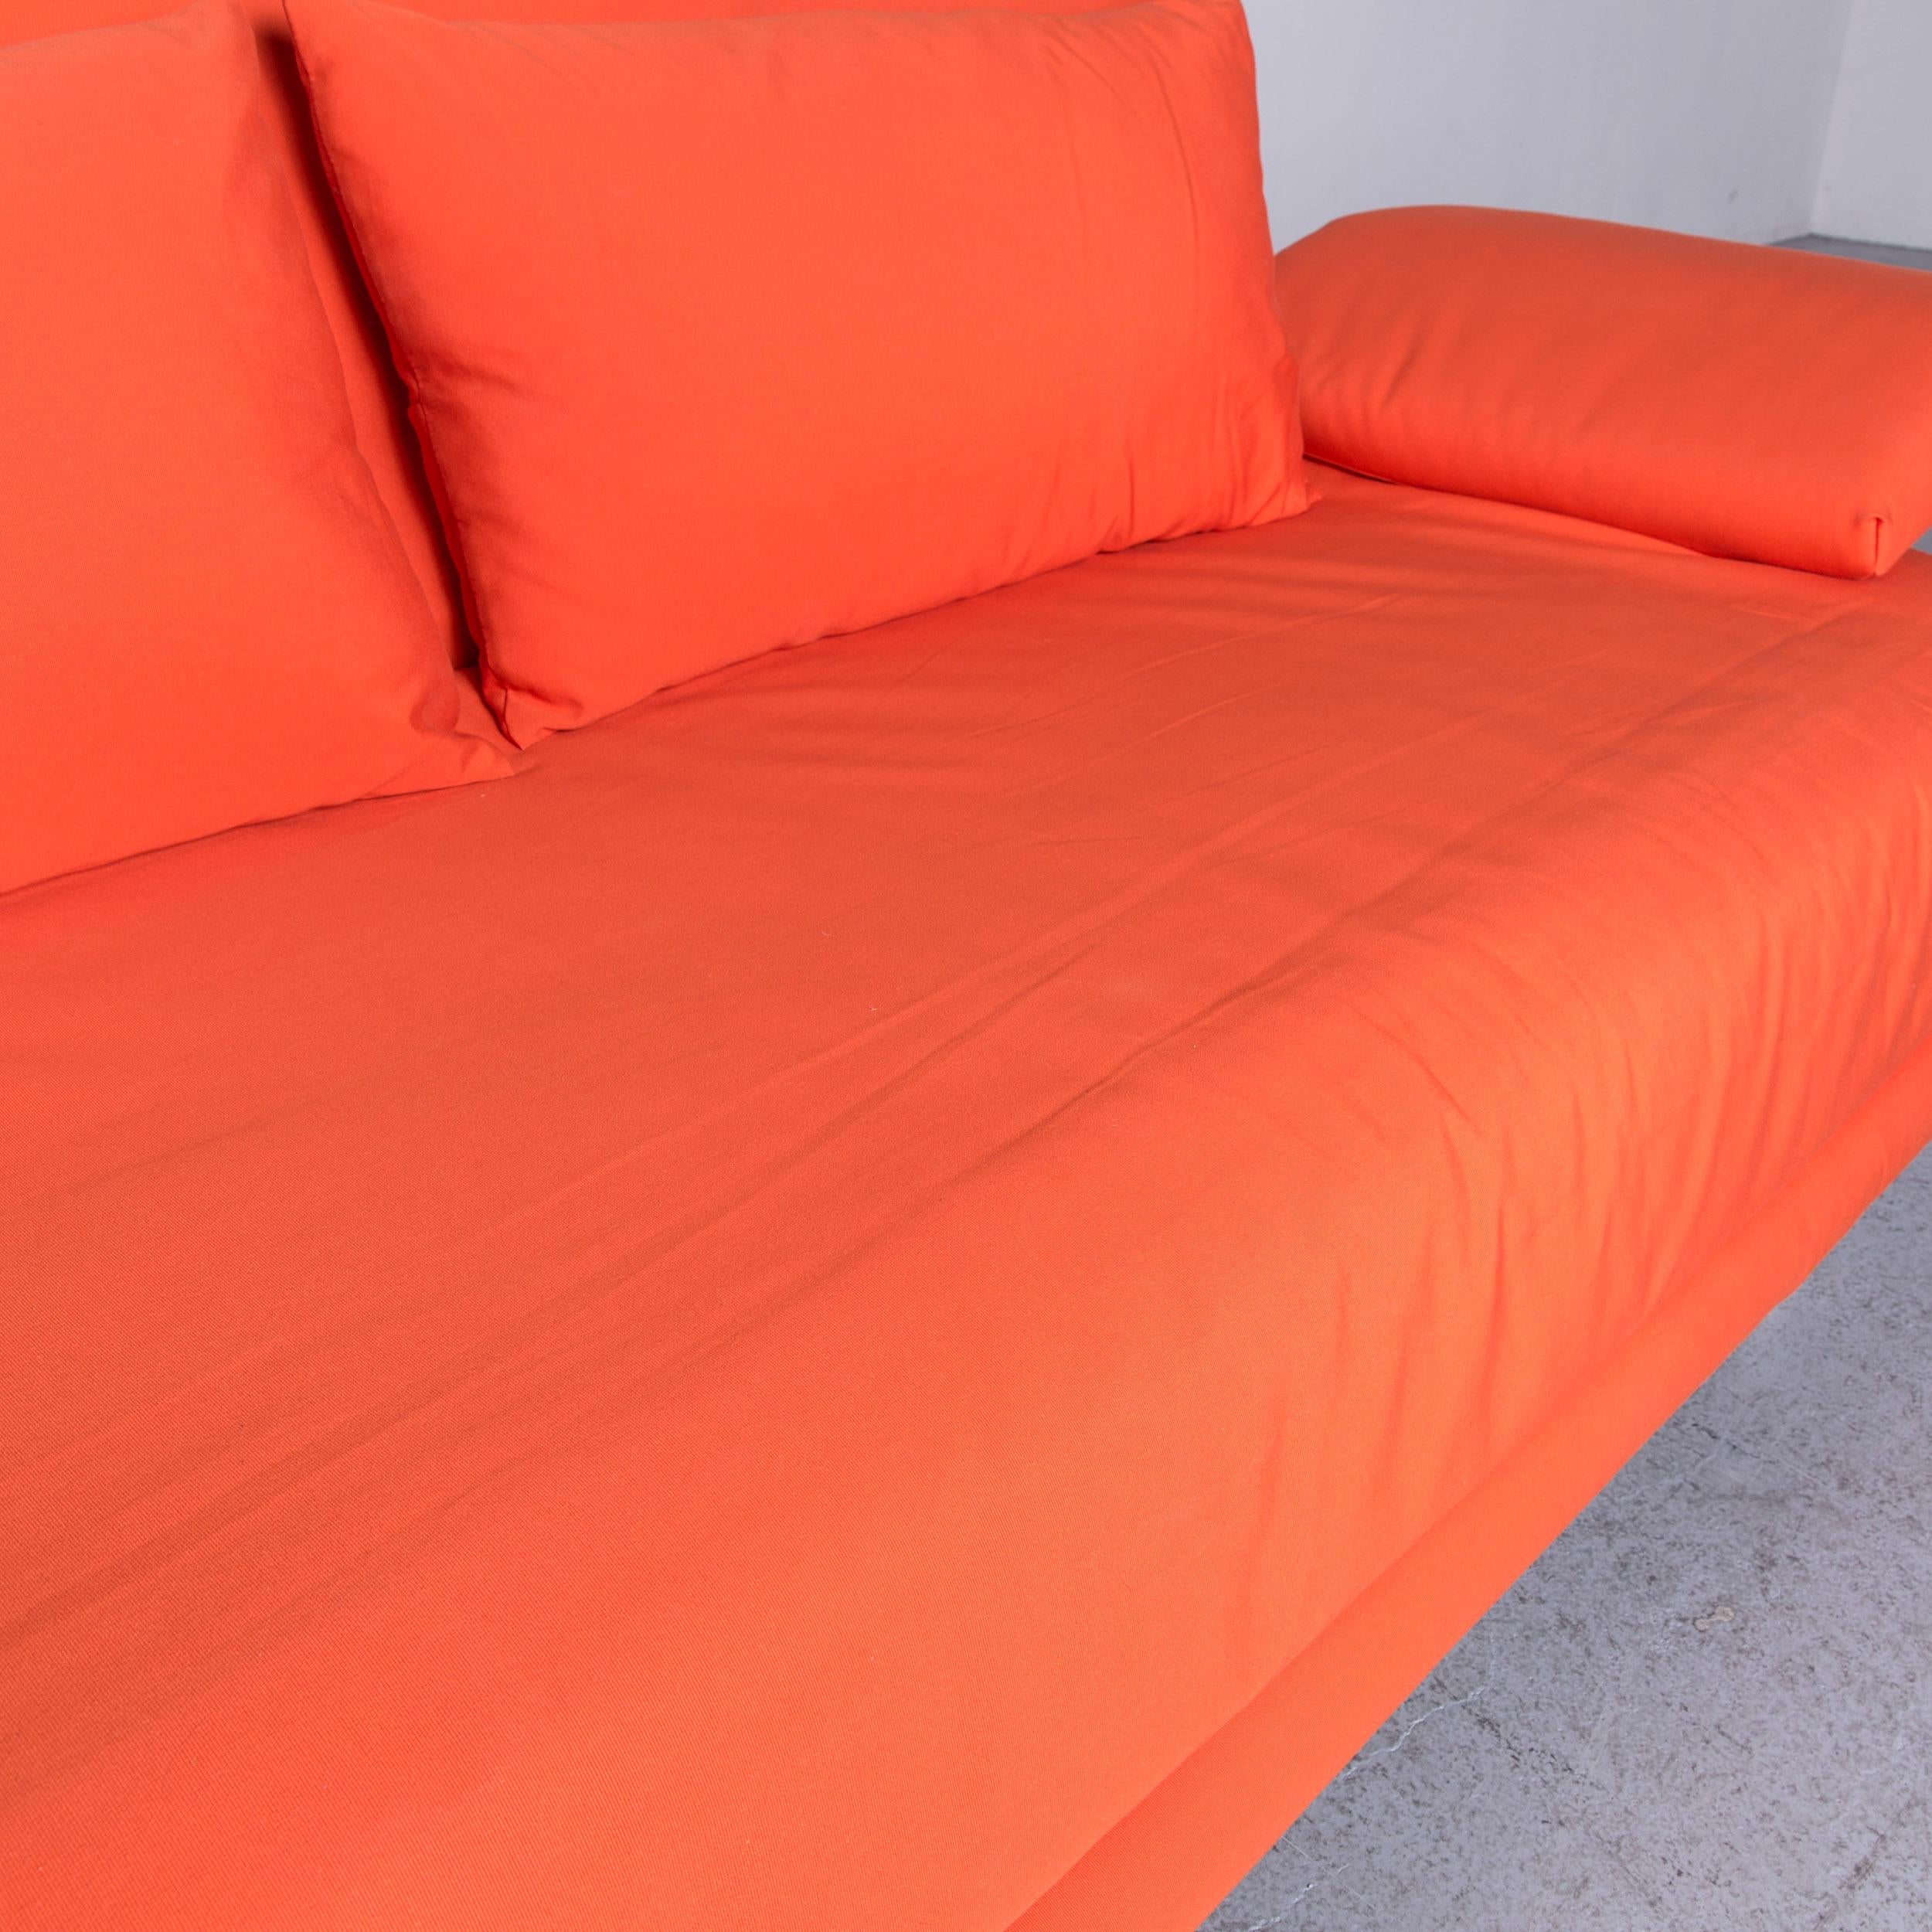 Contemporary Ligne Roset Multy Fabric Sofa-Bed Orange Two-Seat Couch Sleep Function